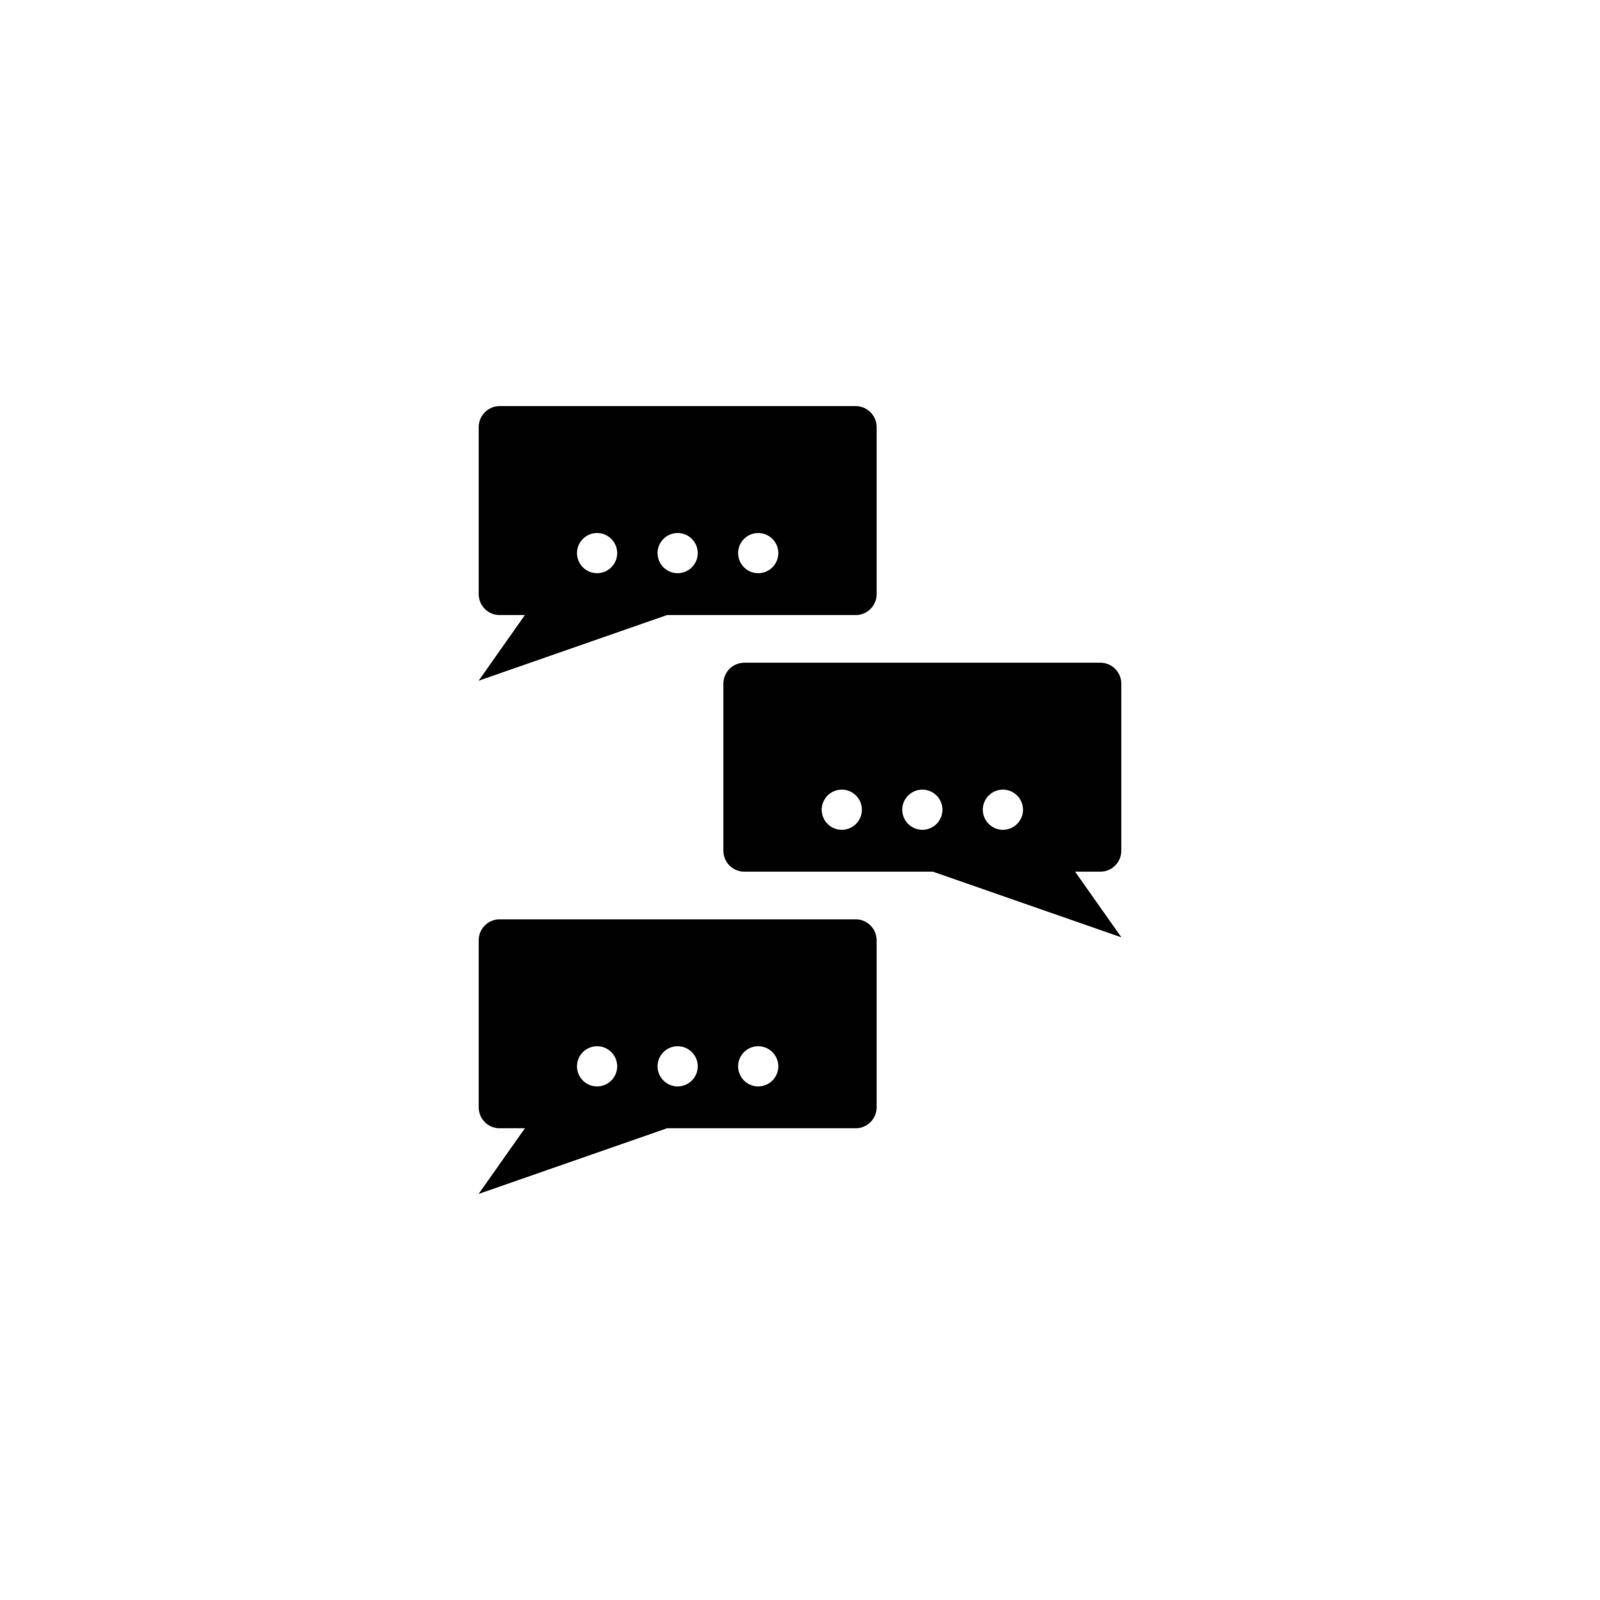 Speech Bubbles vector icon. Simple flat symbol on white background